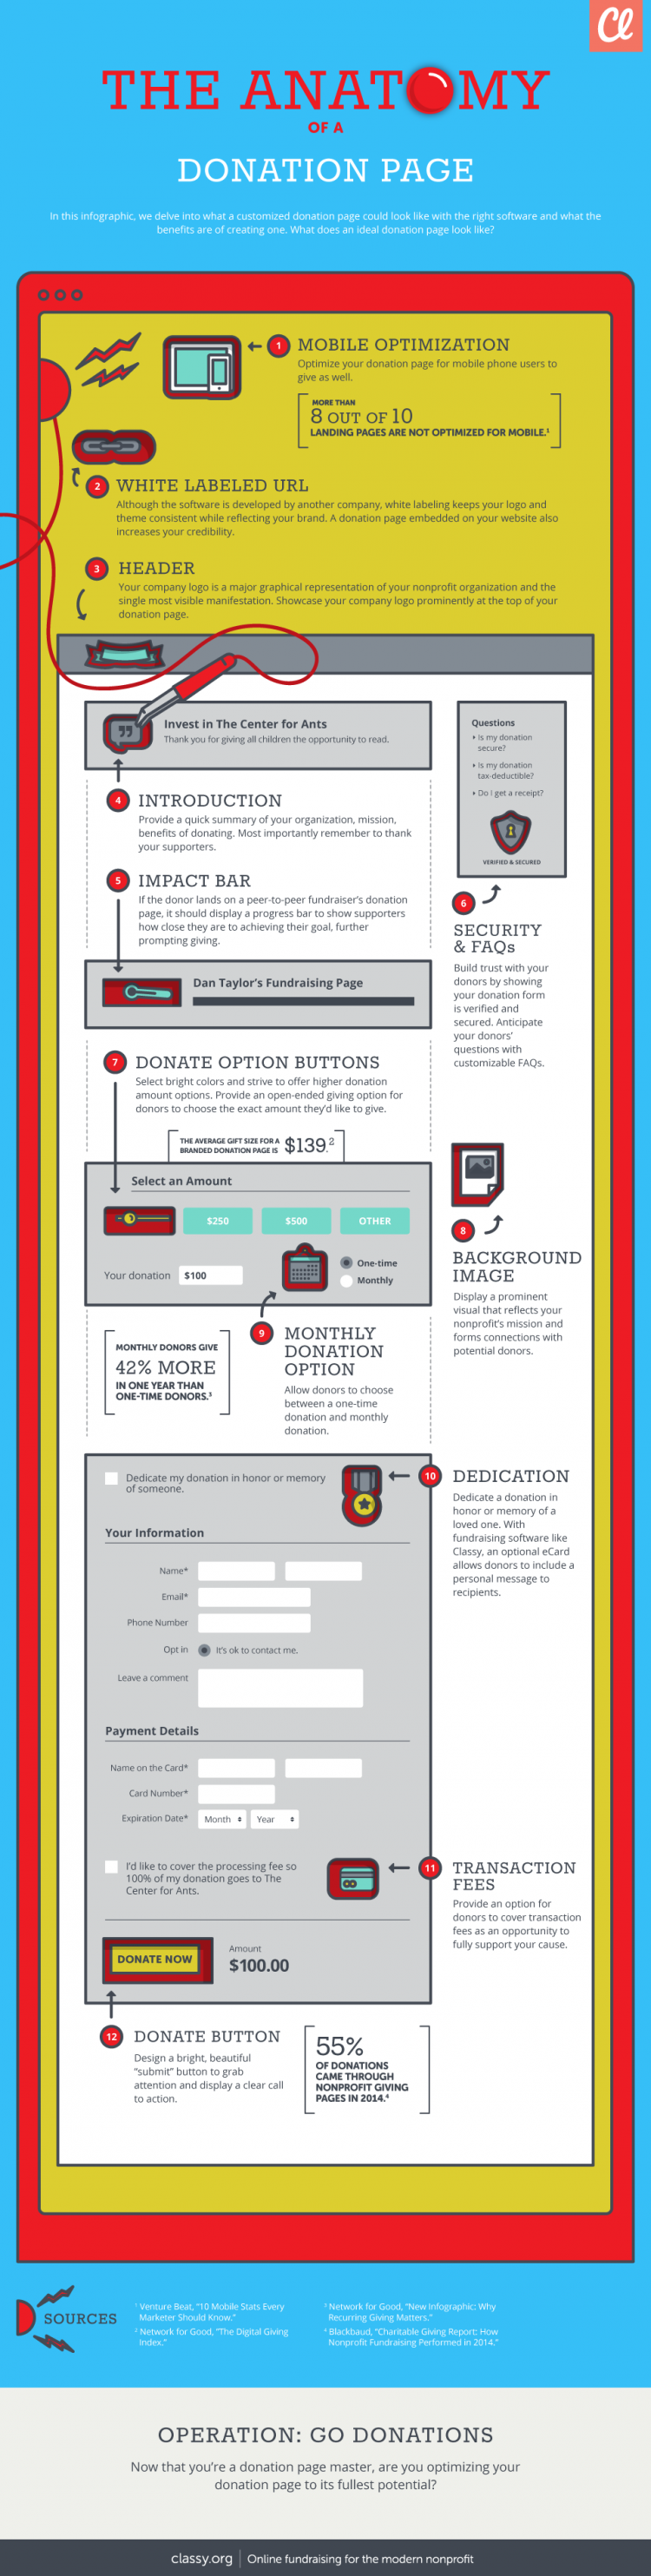 Anatomy of a Donation Page Infographic